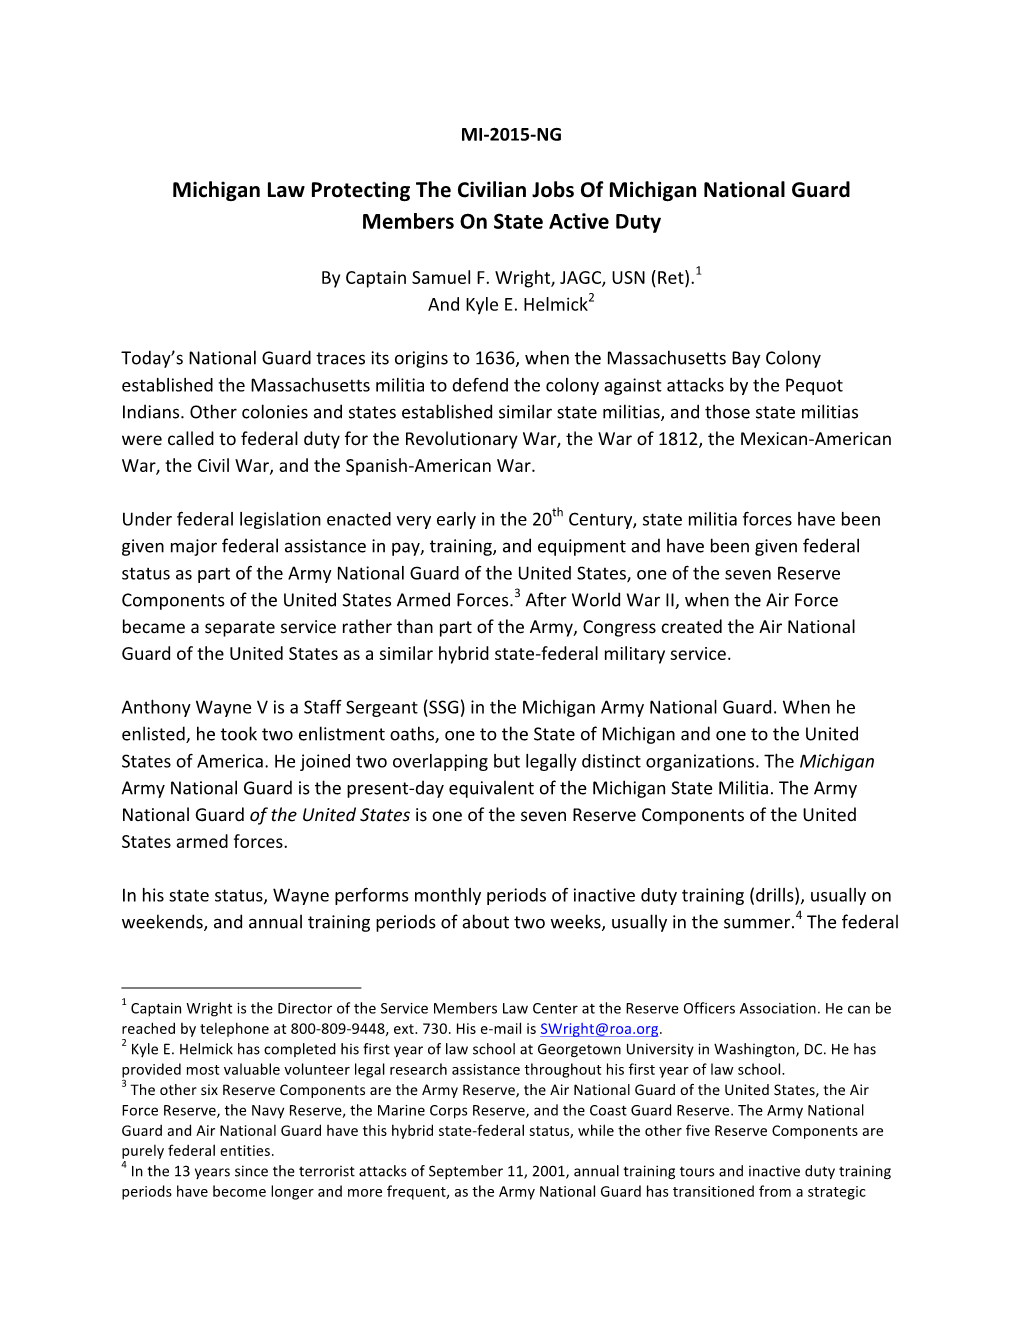 Michigan Law Protecting the Civilian Jobs of Michigan National Guard Members on State Active Duty